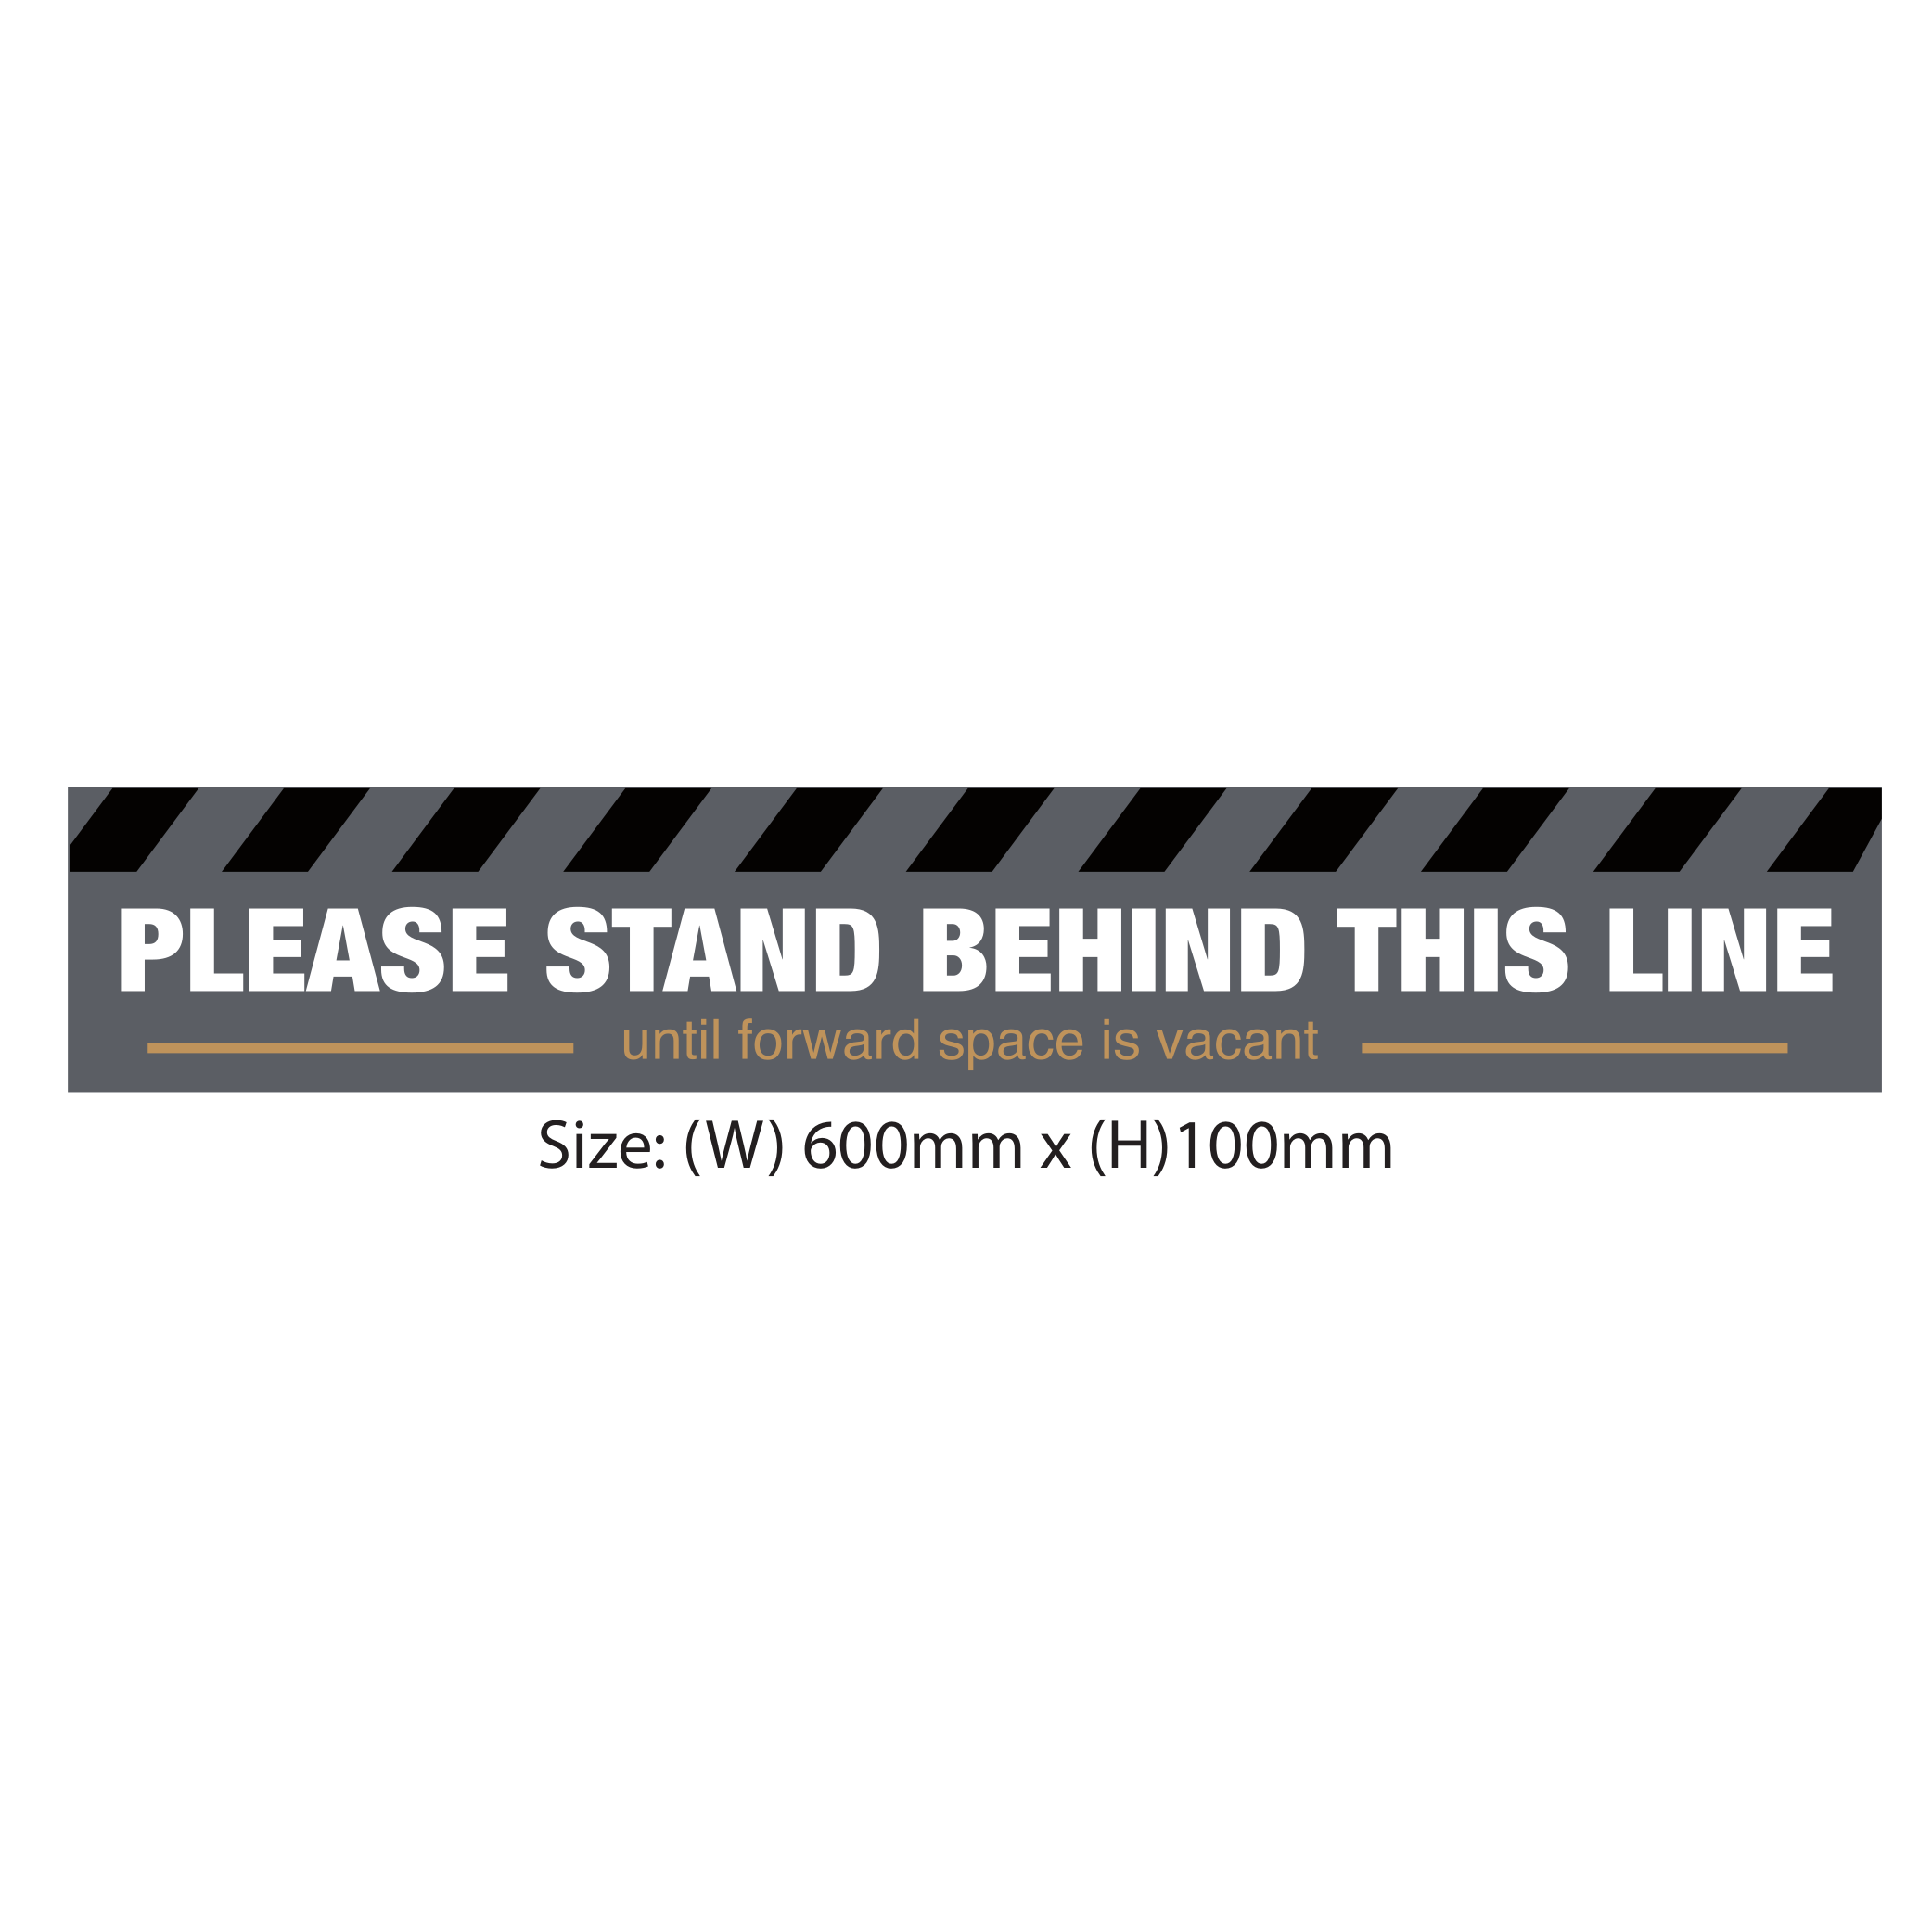 Please stand behind this line until space is vacant floor graphic